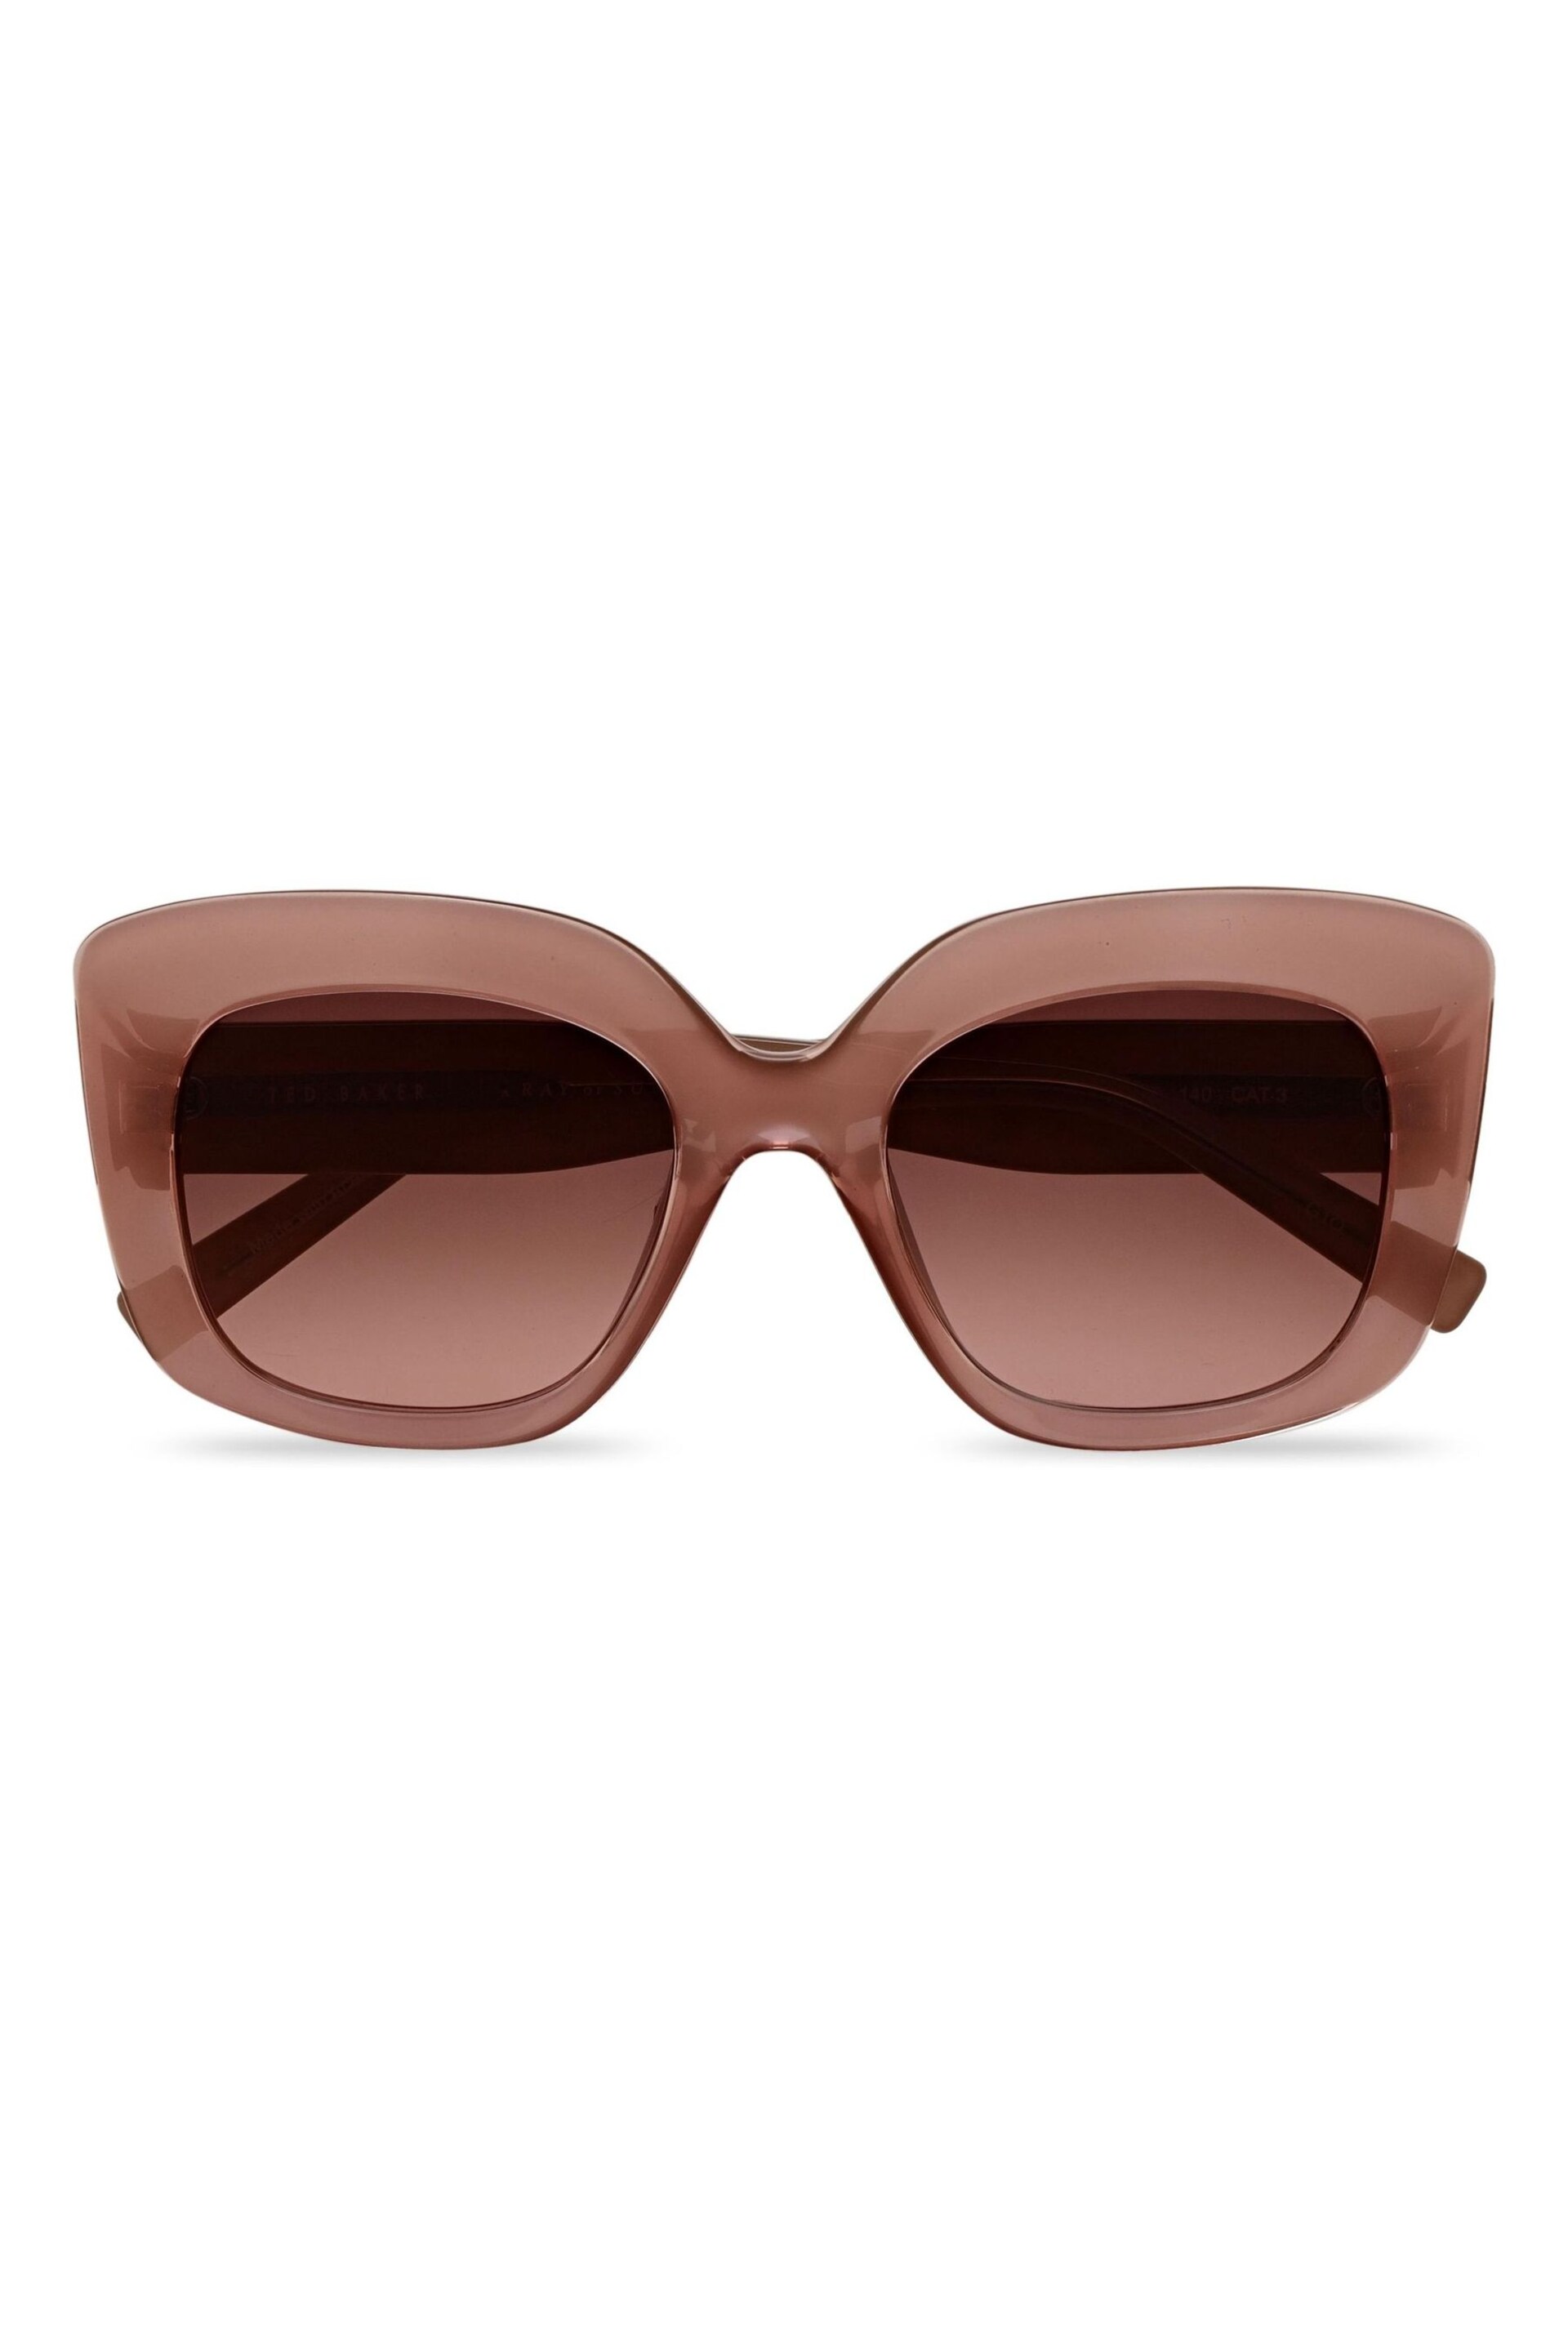 Ted Baker Pink Hattie Sunglasses - Image 2 of 5